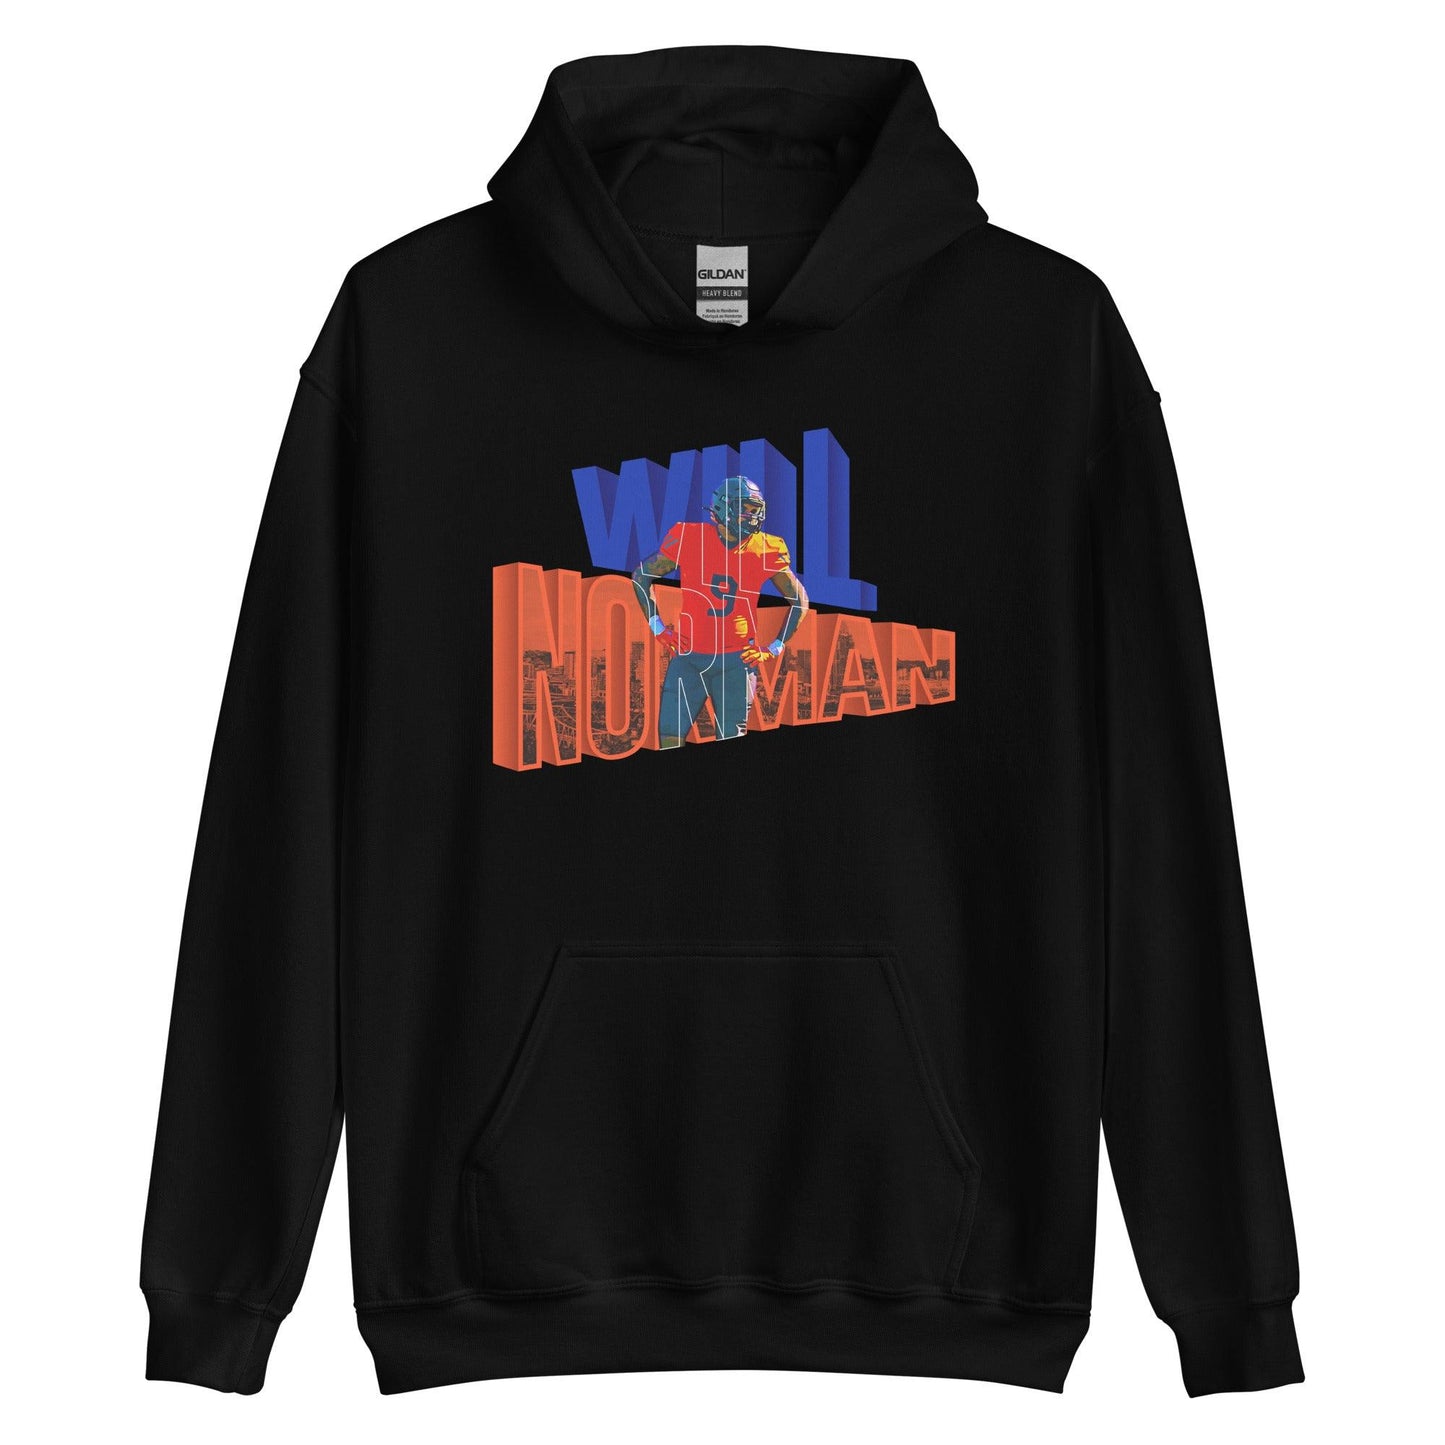 Will Norman "Signature" Hoodie - Fan Arch